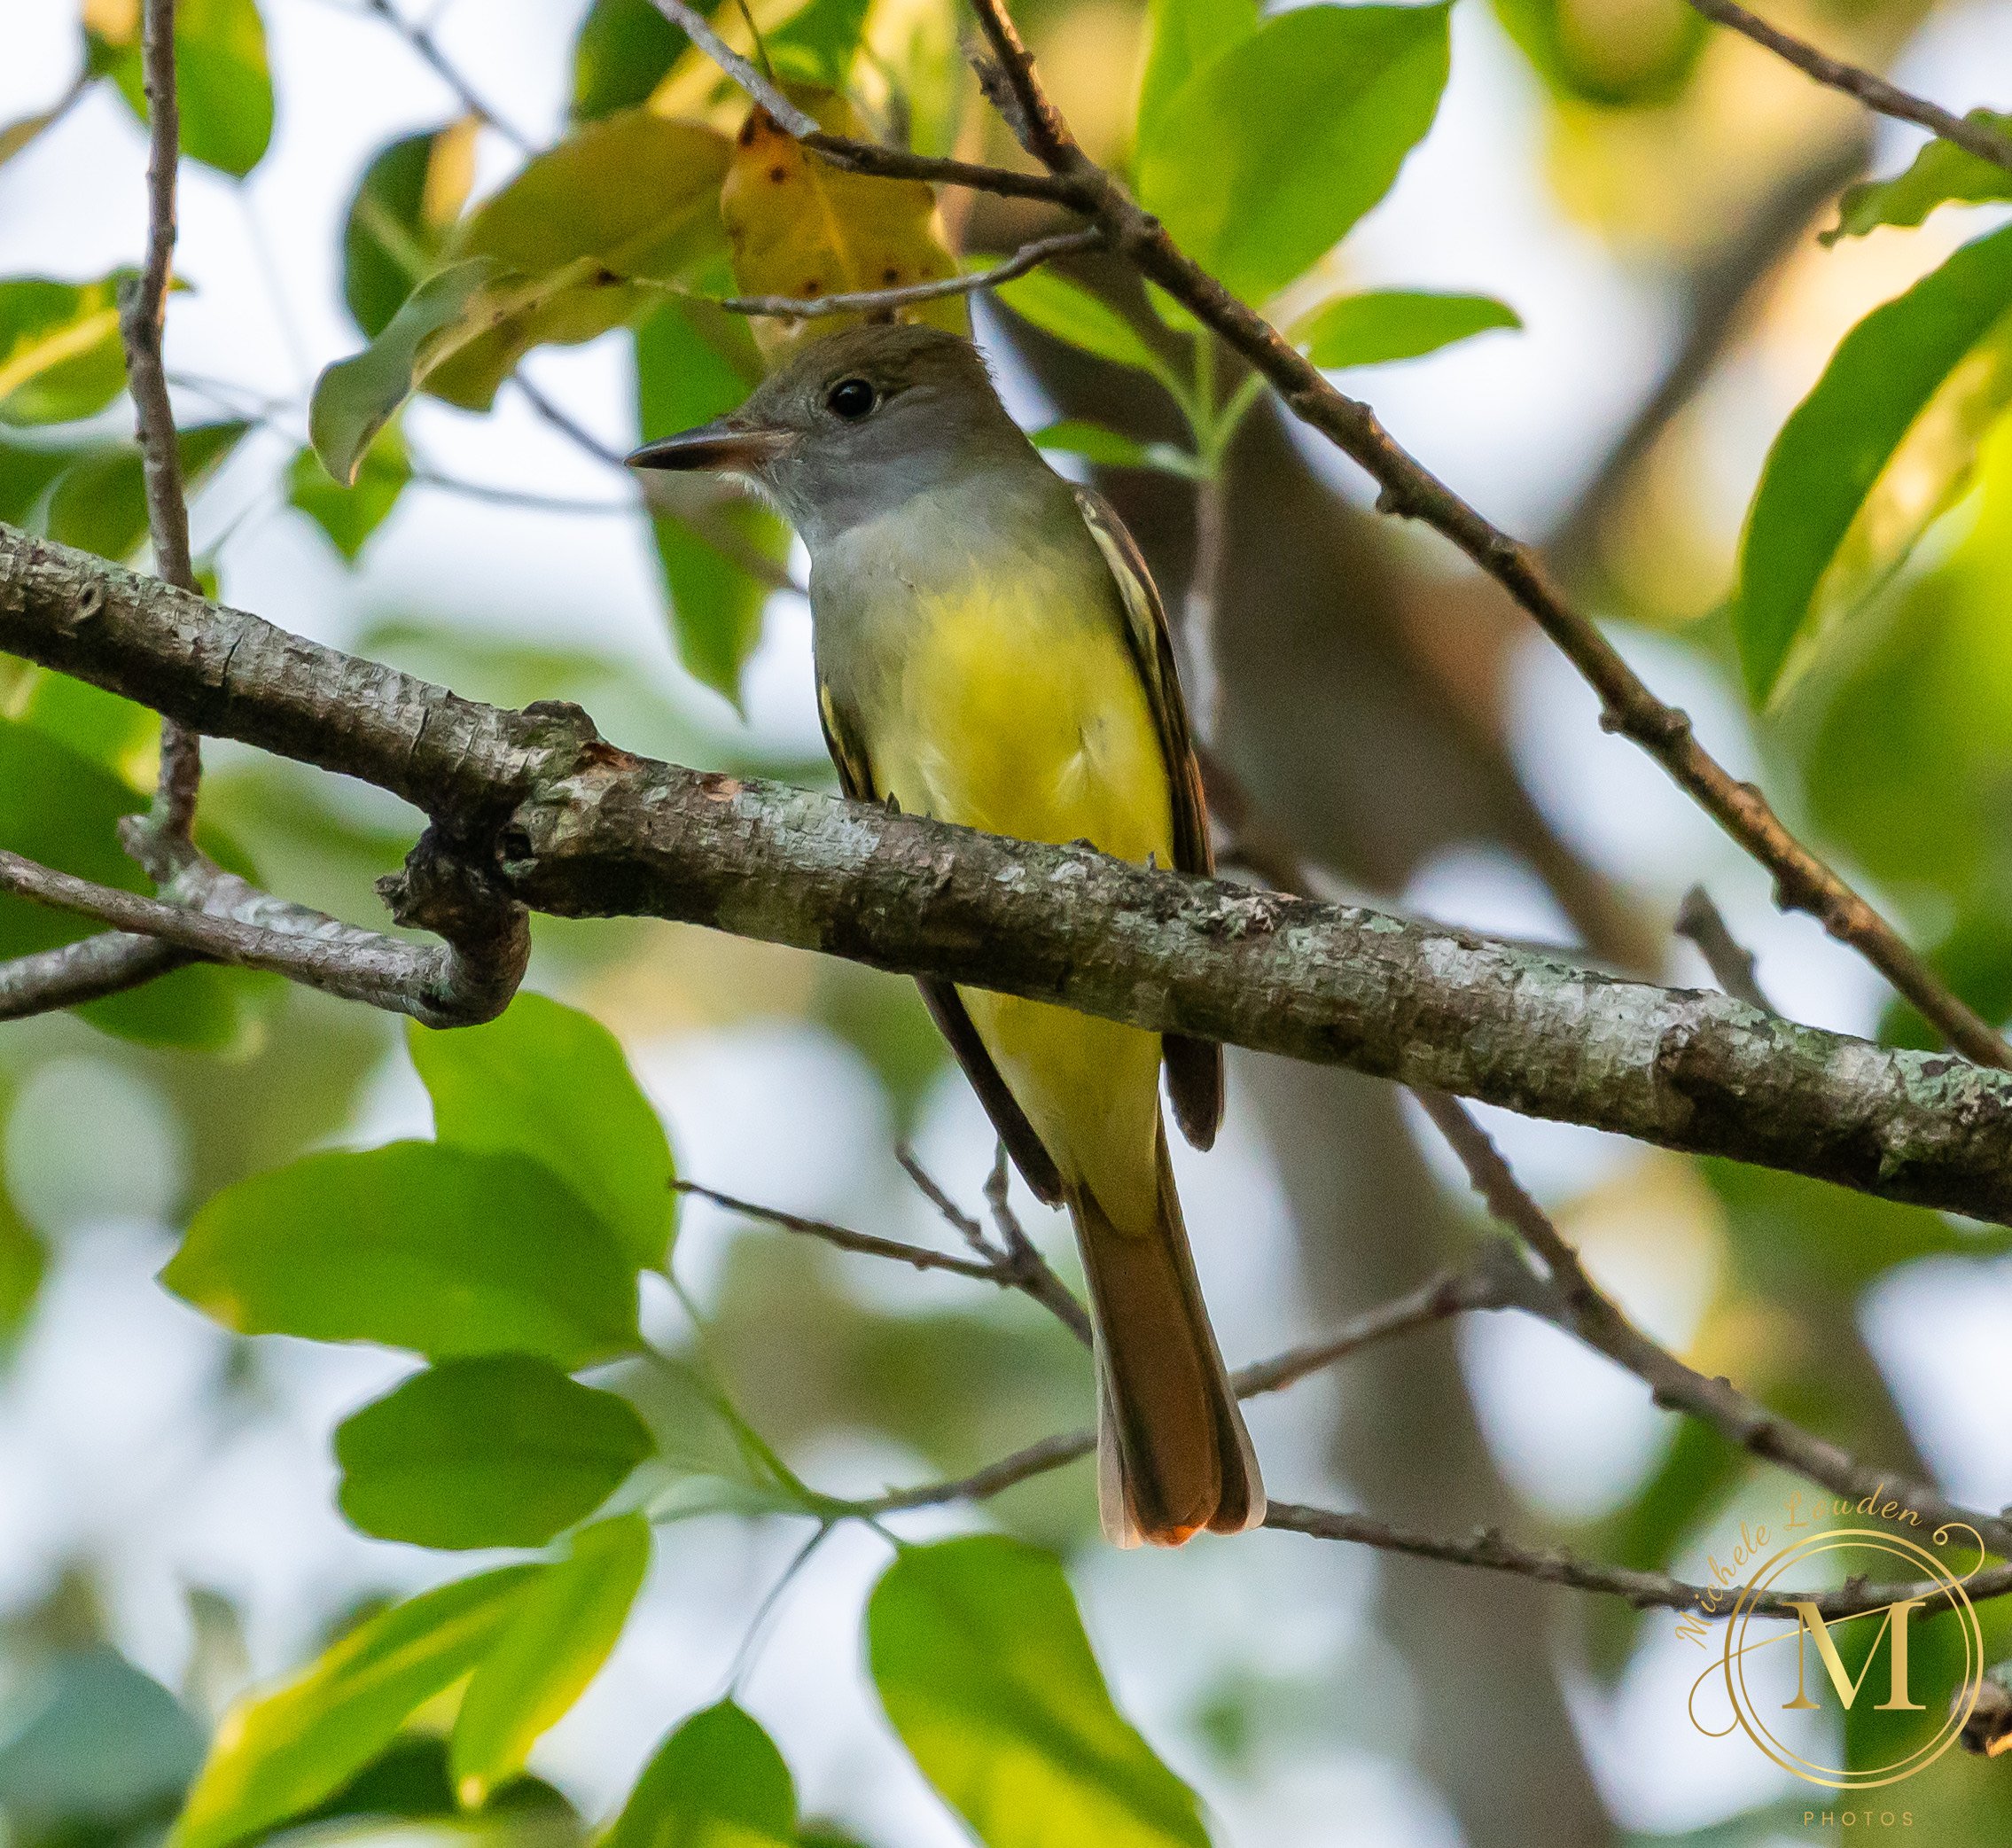  Great Crested Flycatcher by Michele Louden 